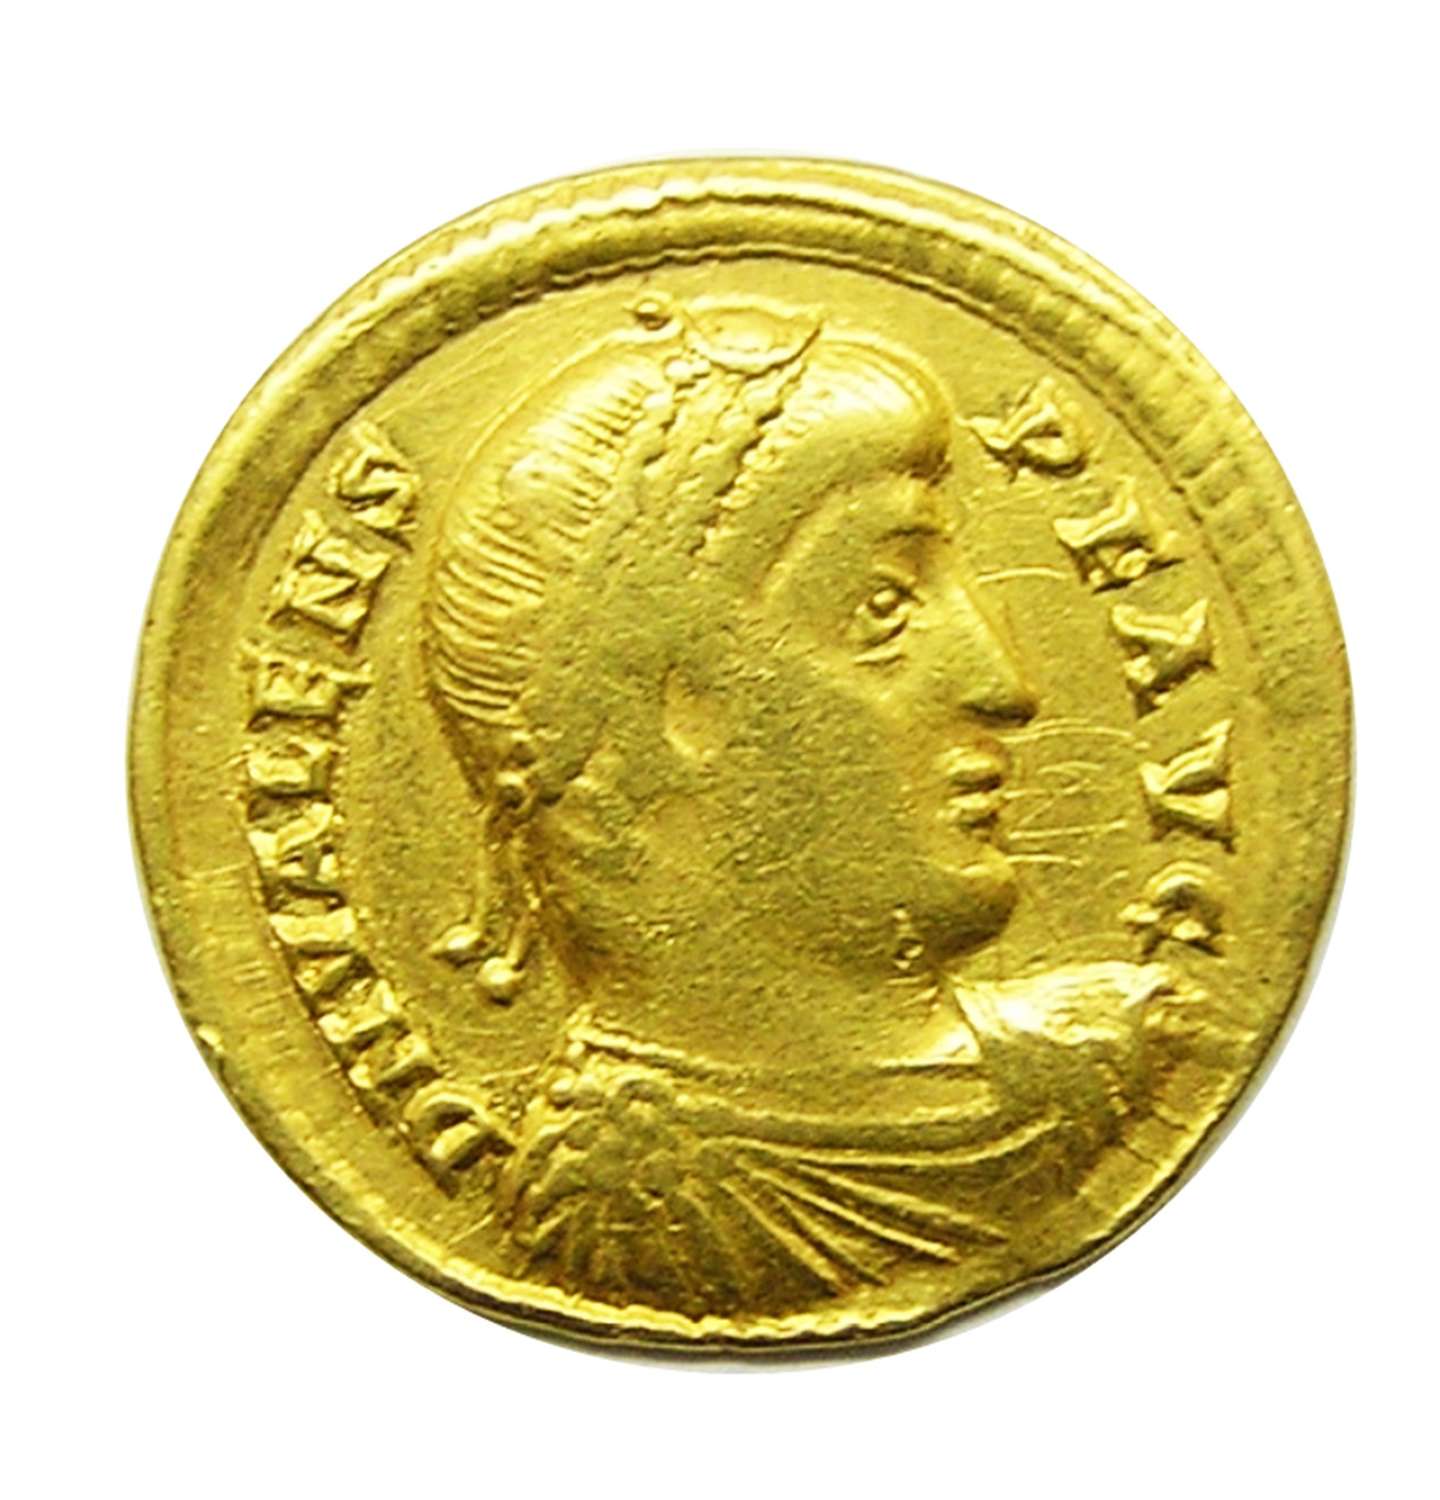 Roman Gold Solidus of Emperor Valens minted in Nicomedia